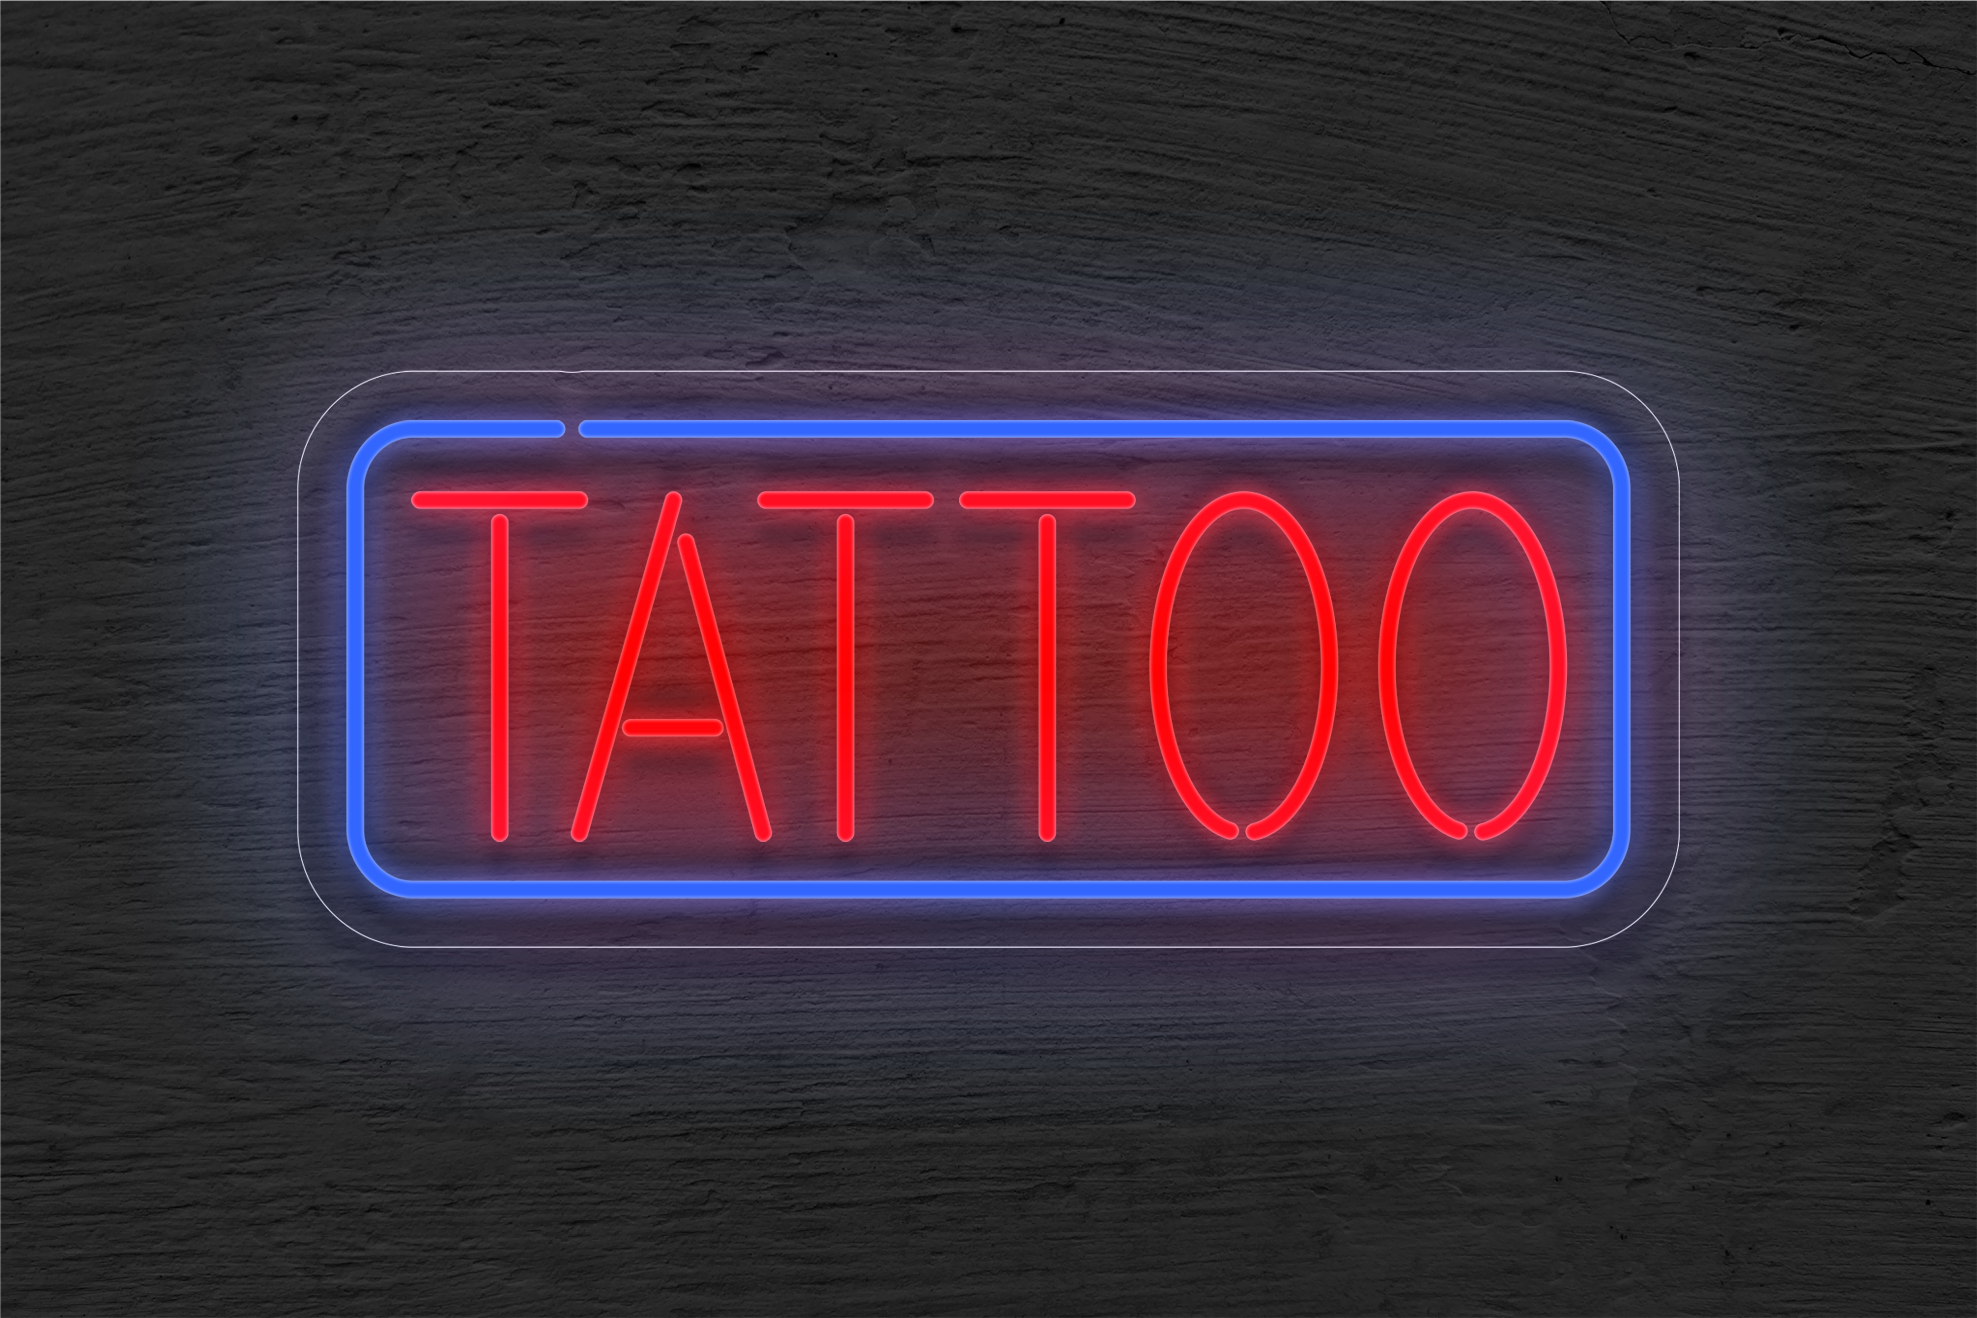 "Tattoo" with Border LED Neon Sign